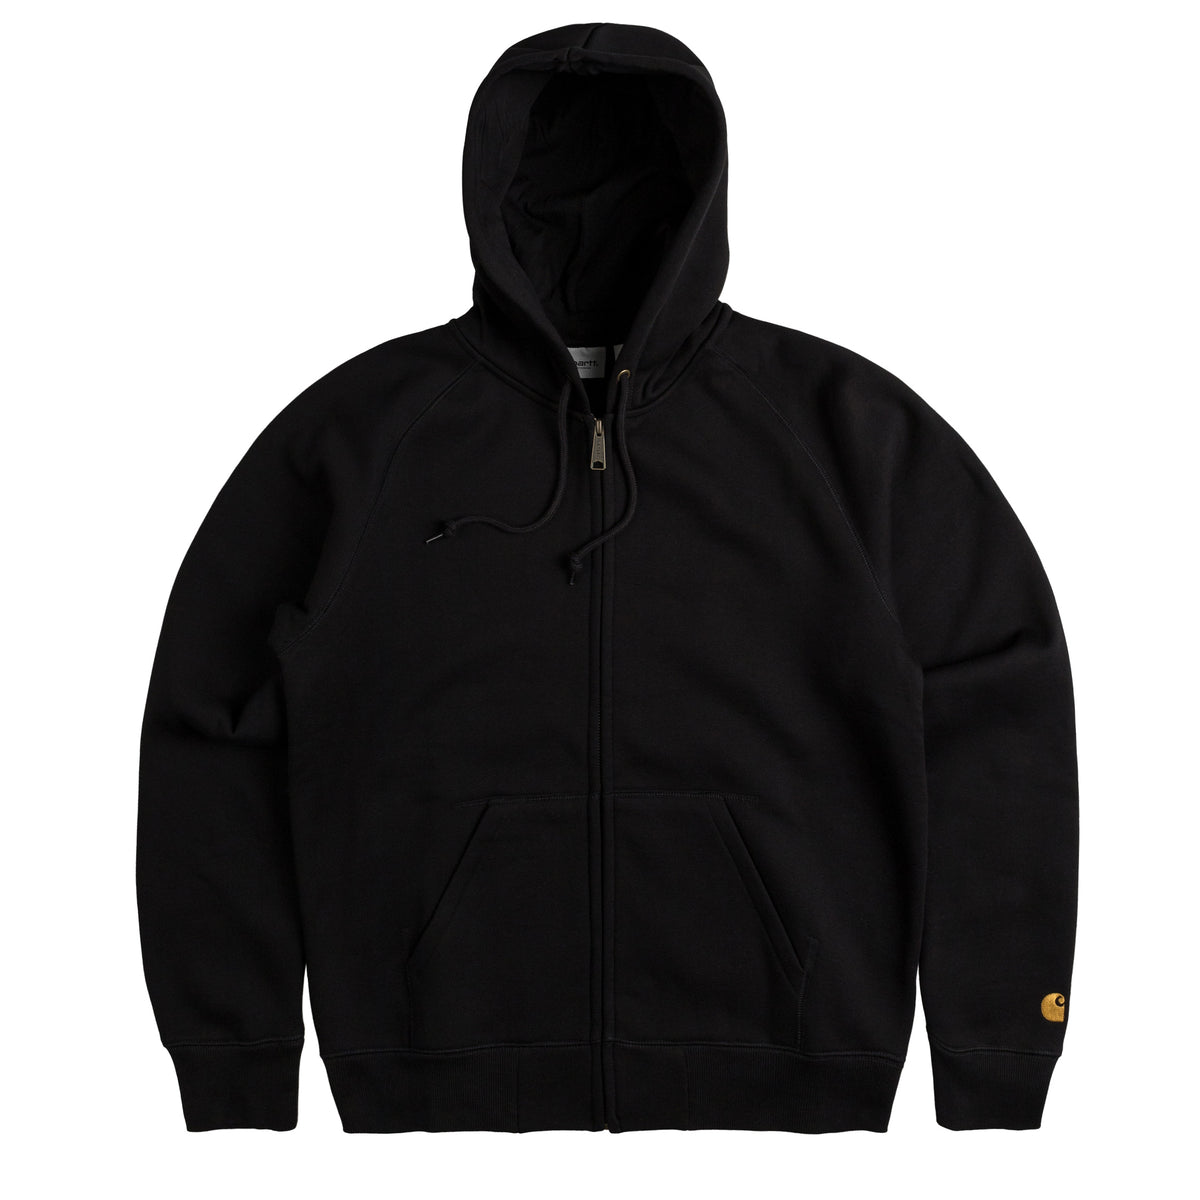 Carhartt WIP Hooded Chase Jacket » Buy online now!